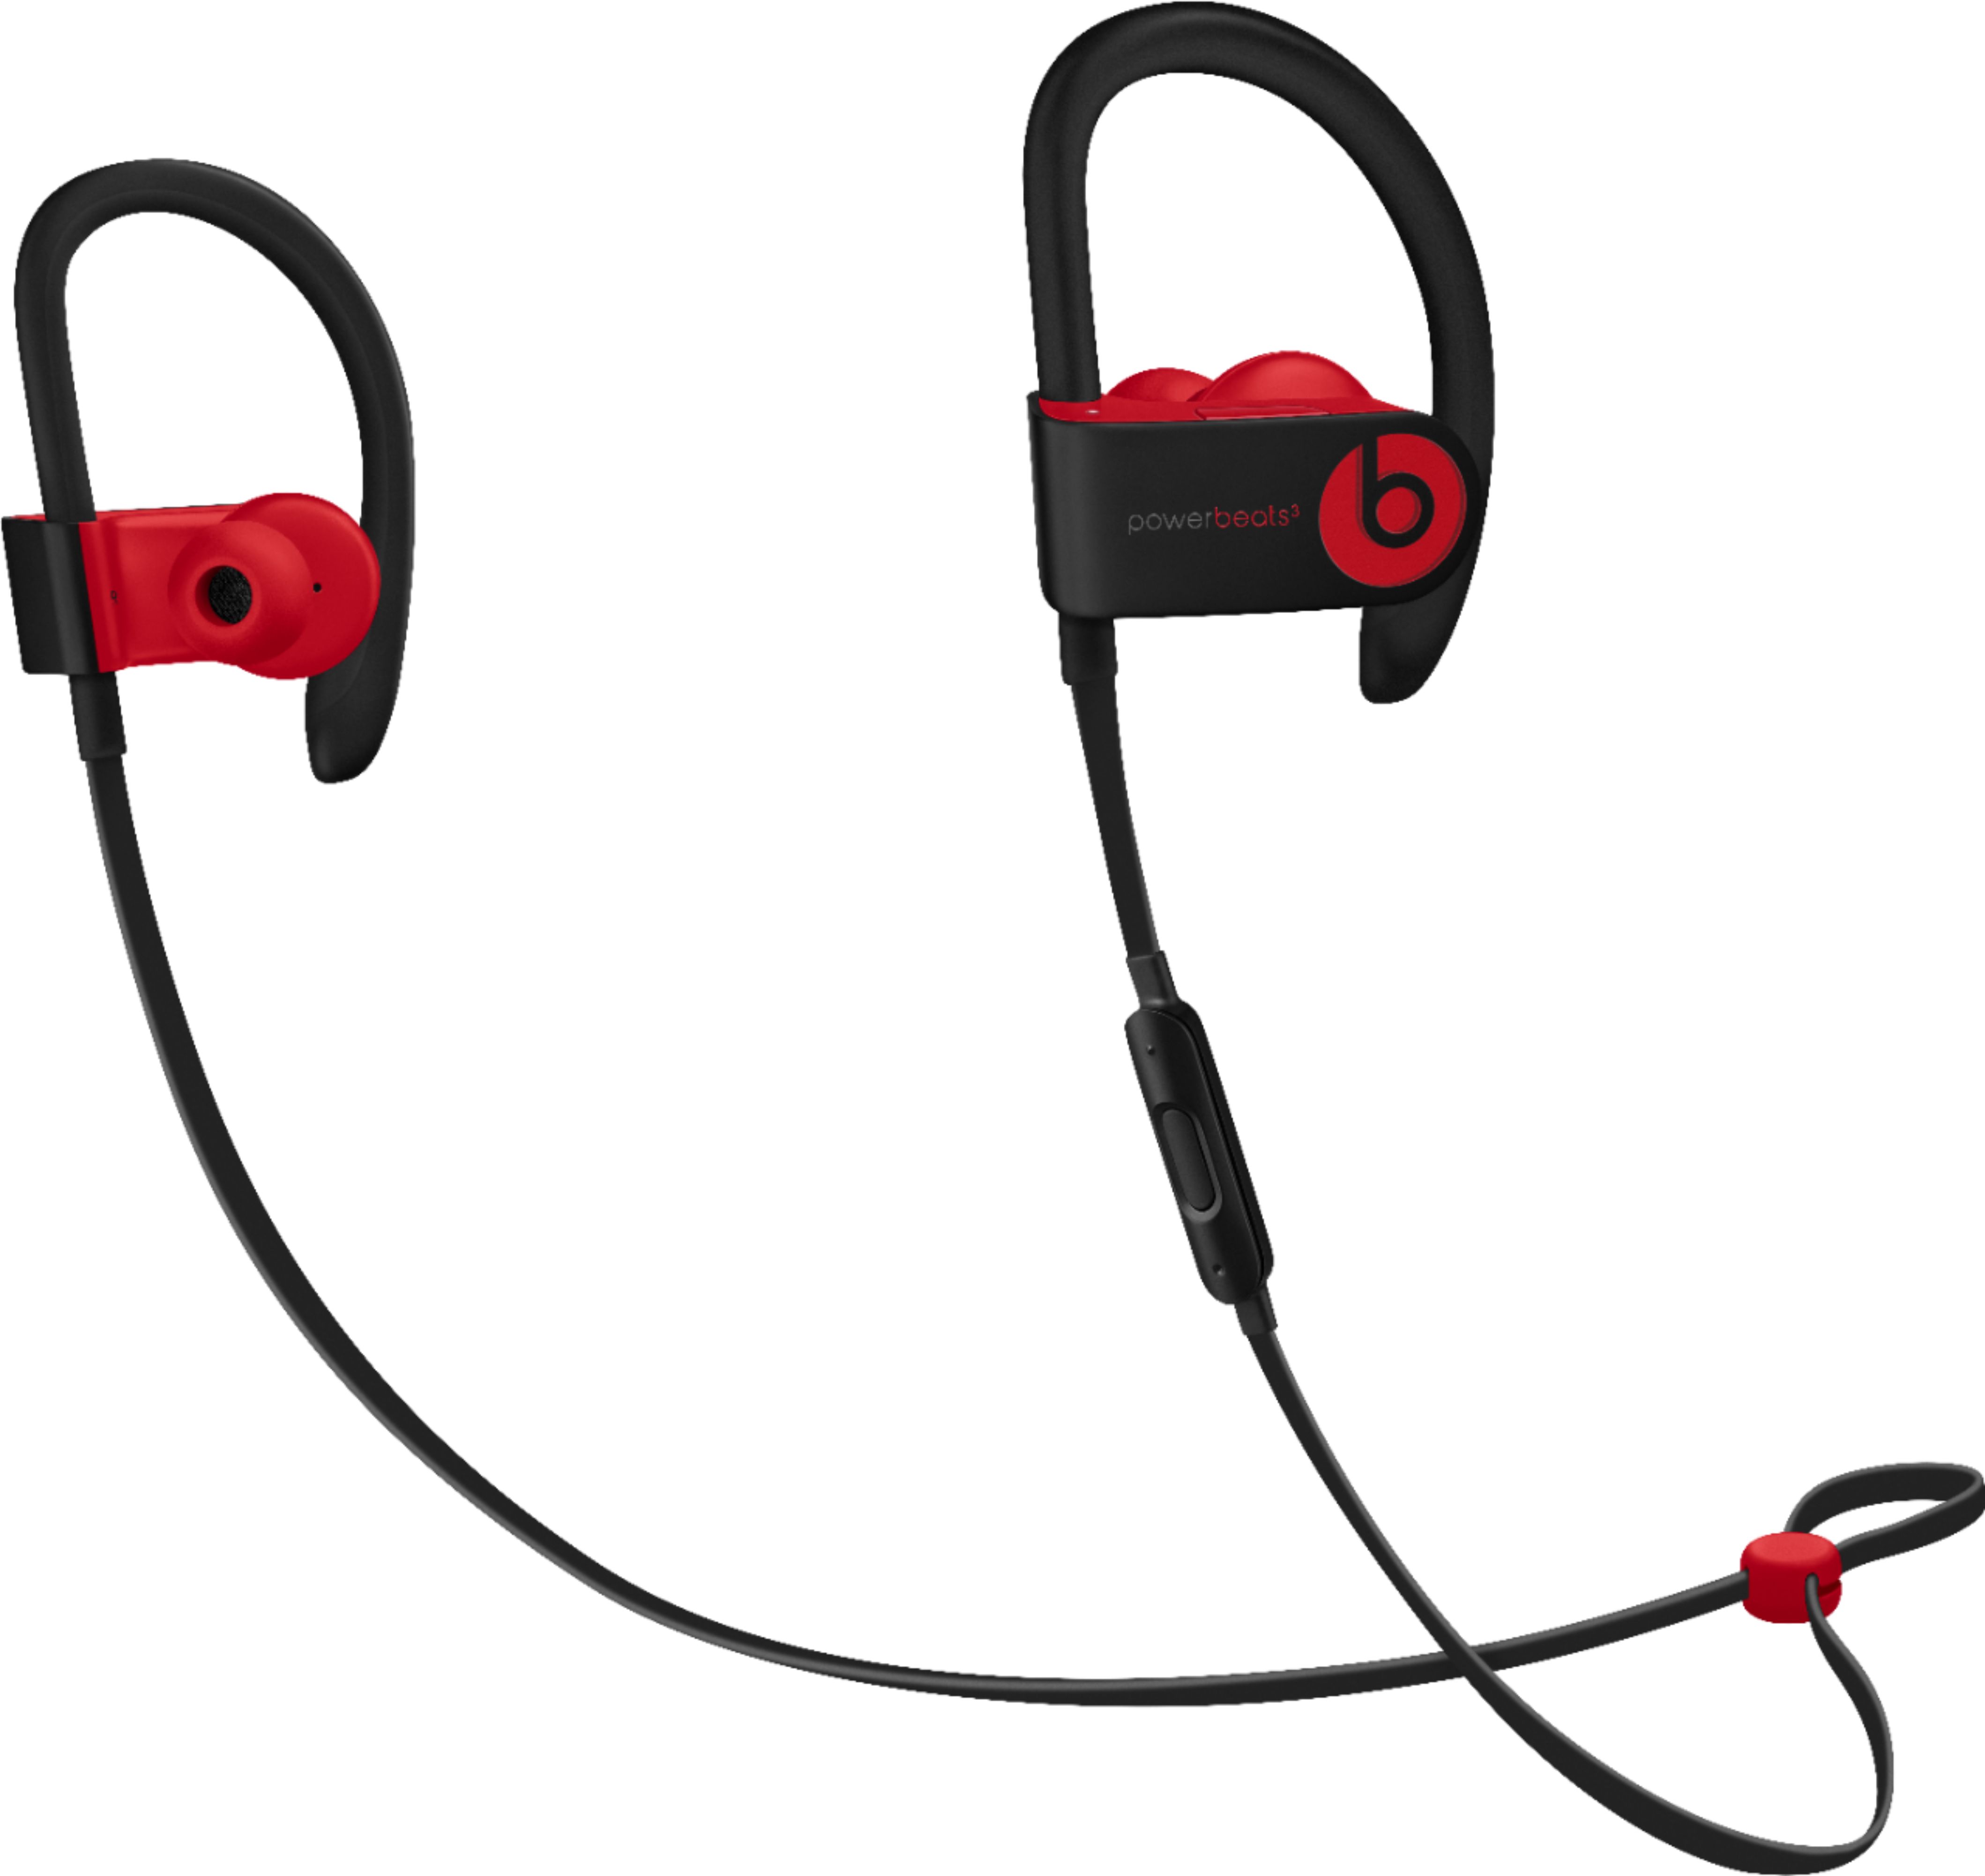 powerbeats 2 black and red